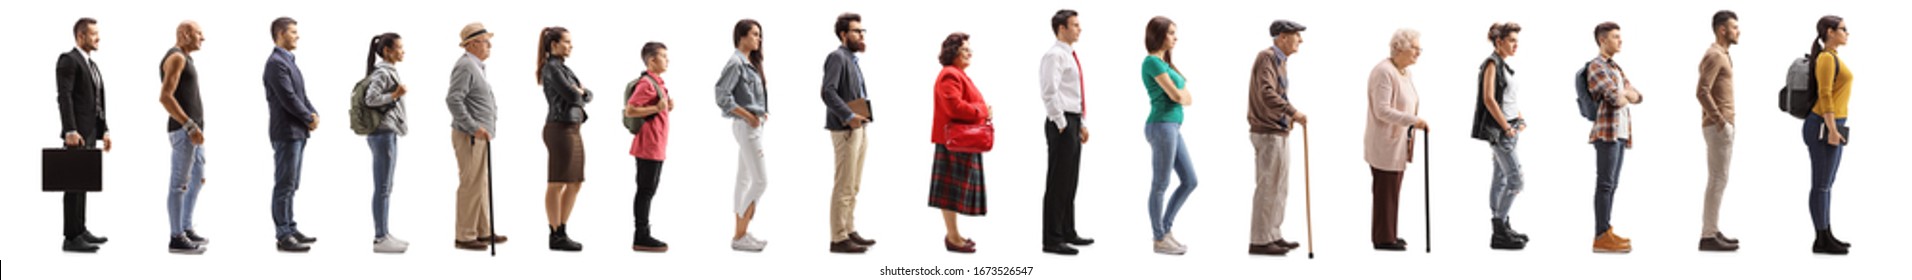 Full length profile shot of many young and older people waiting in line isolated on white background - Shutterstock ID 1673526547